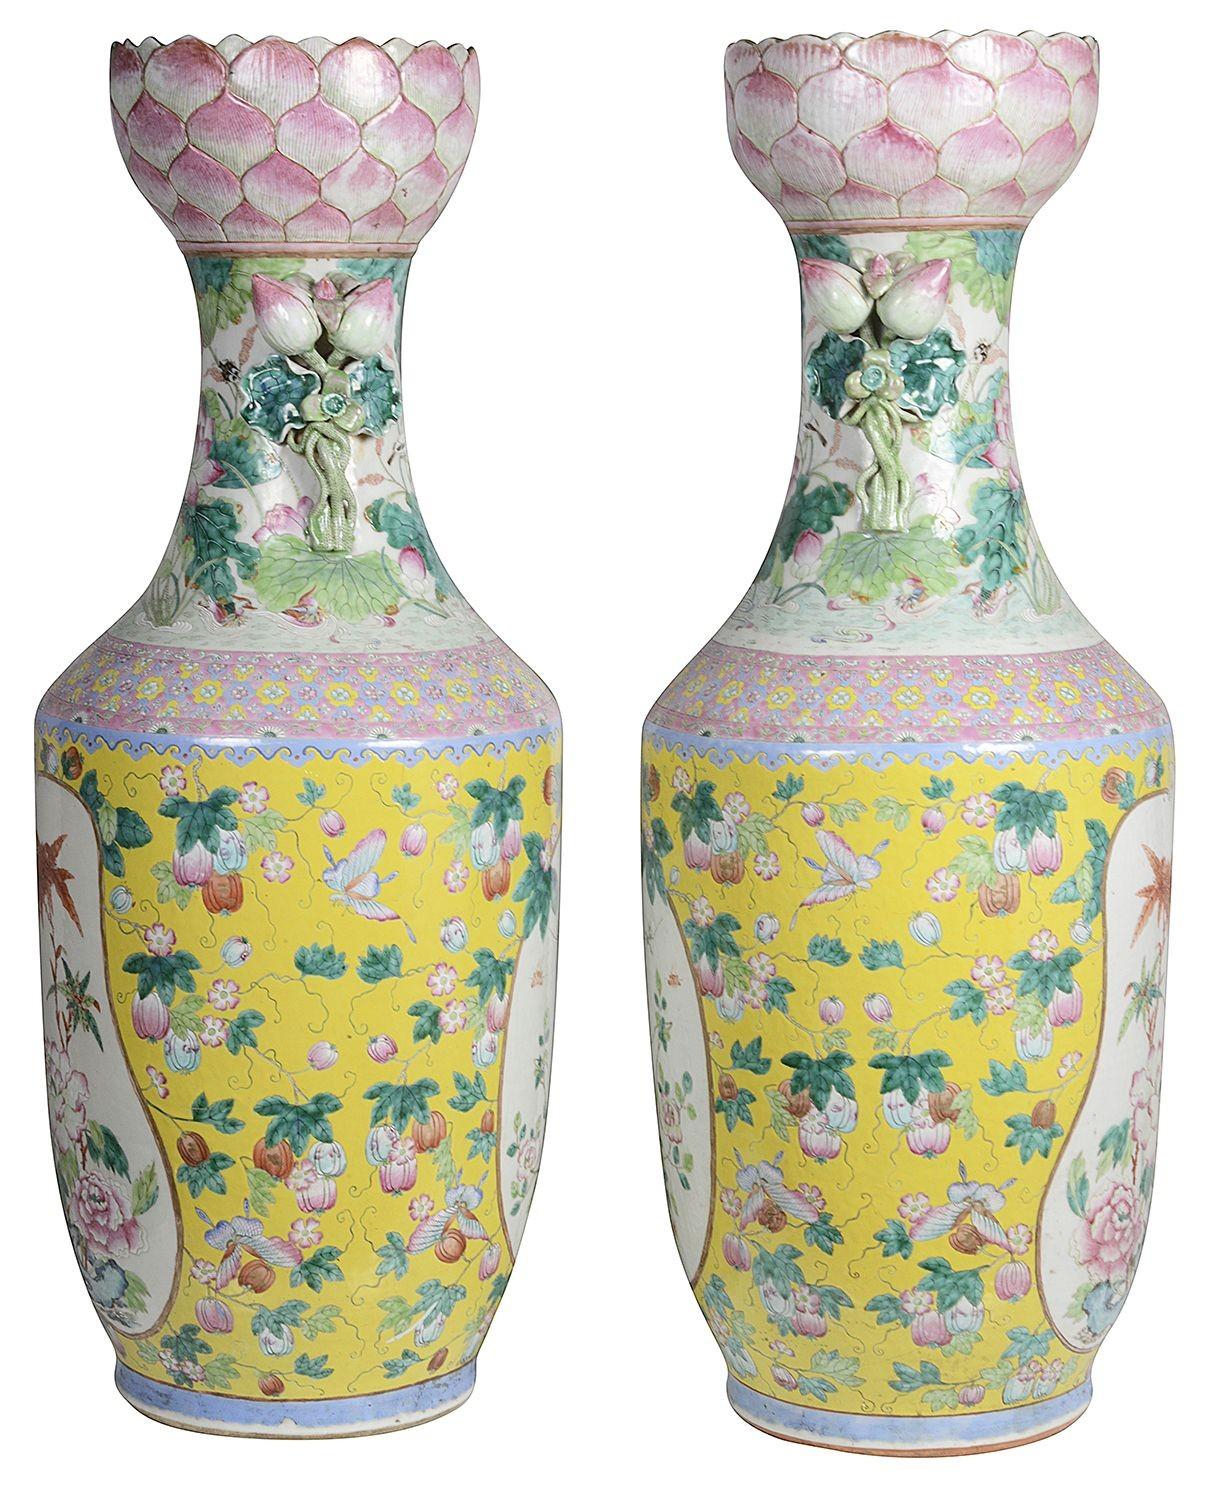 Porcelain Rare Pair of 19th Century Chinese Famille Rose Vases For Sale